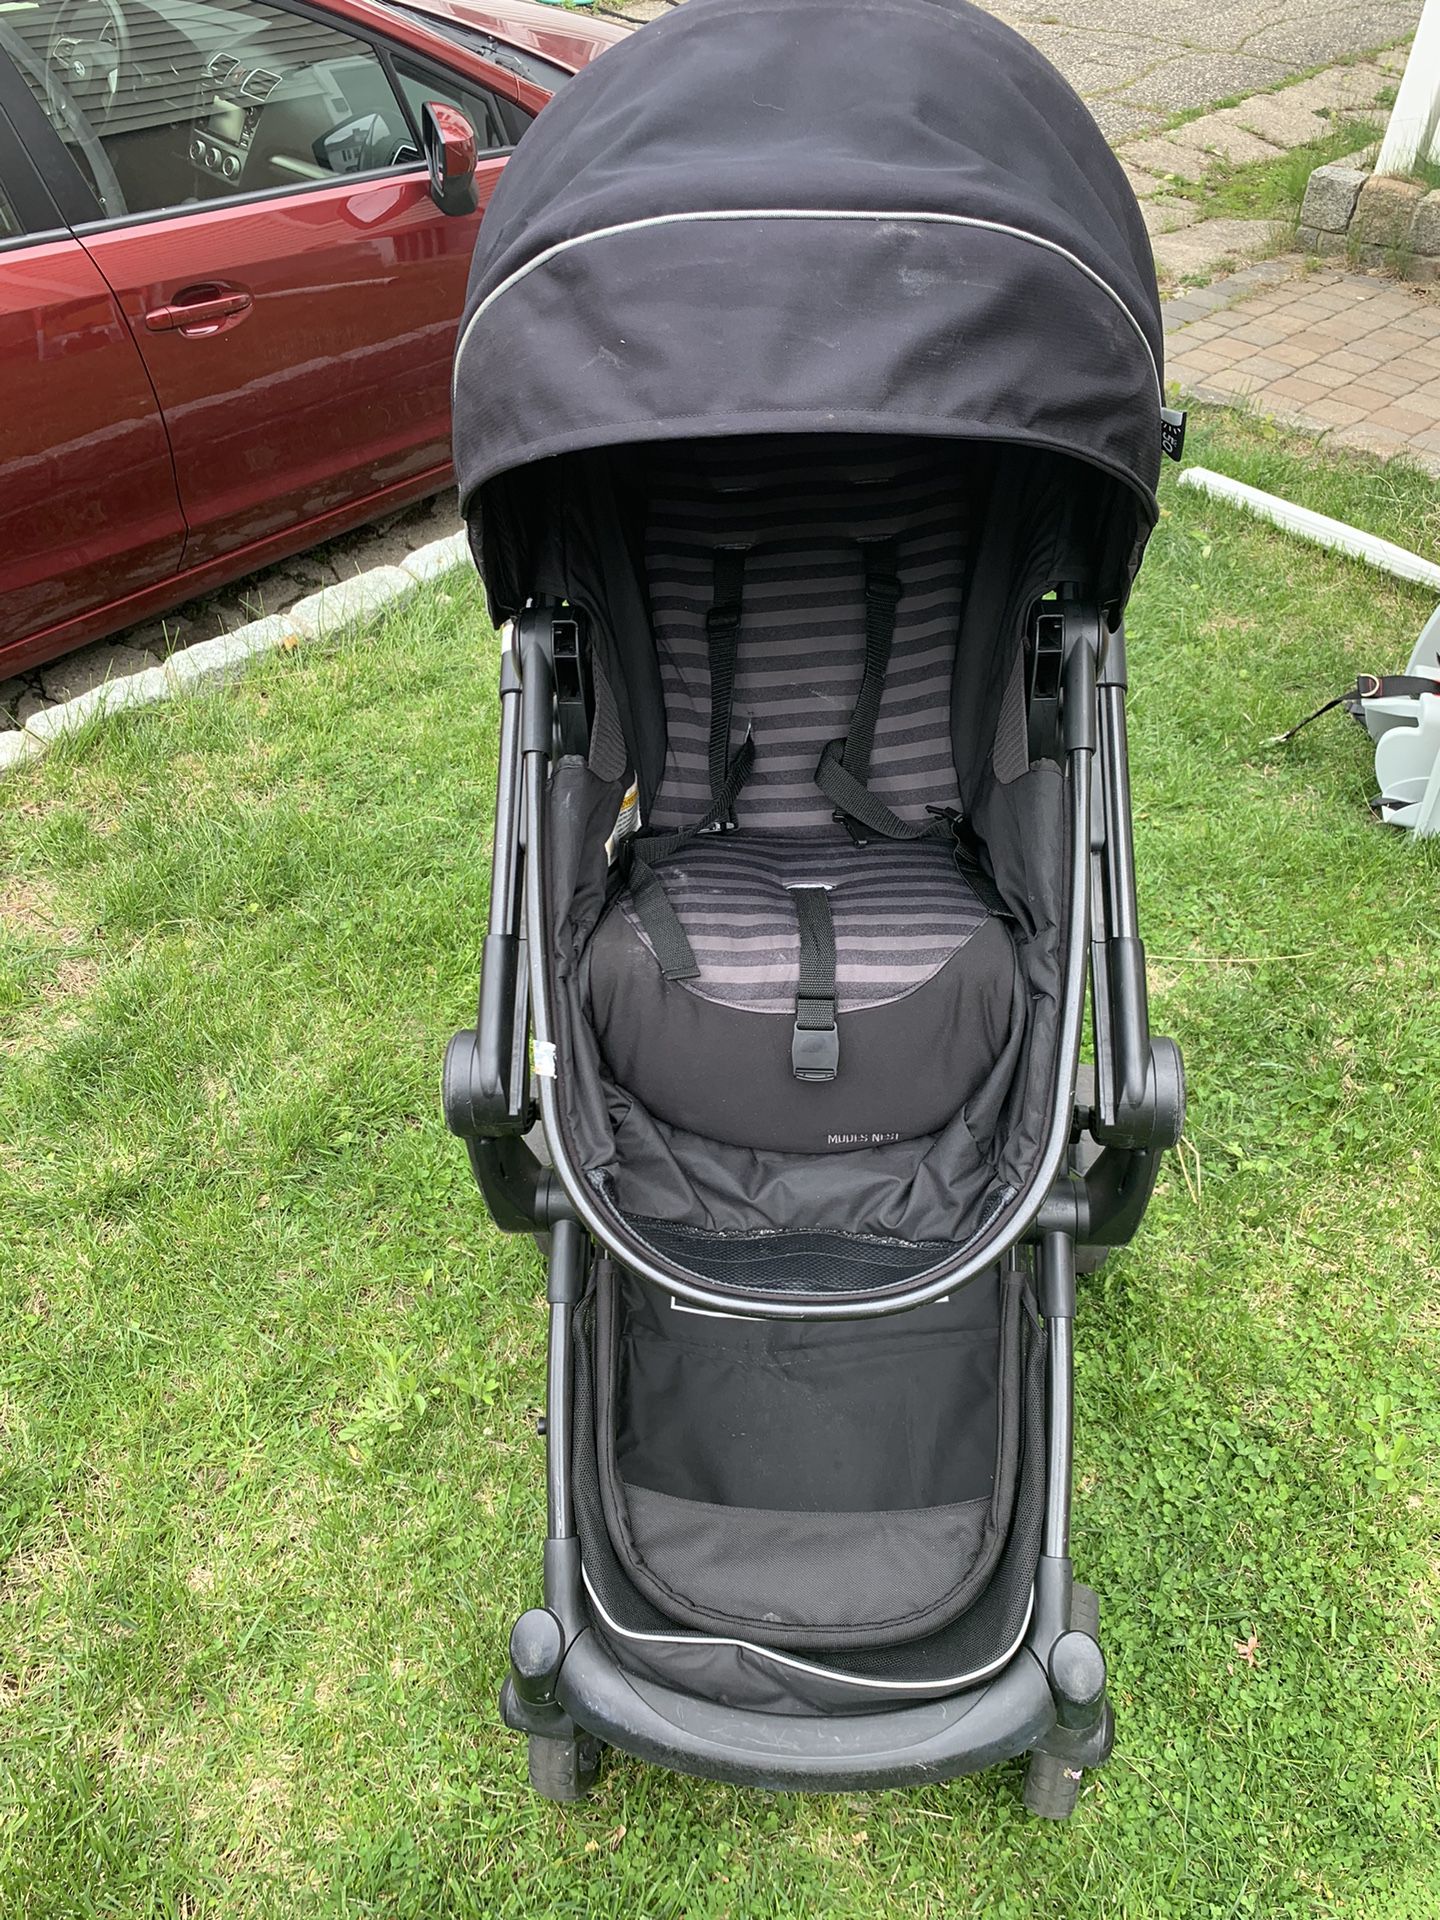 Baby /toddler Stroller-excellent Condition 